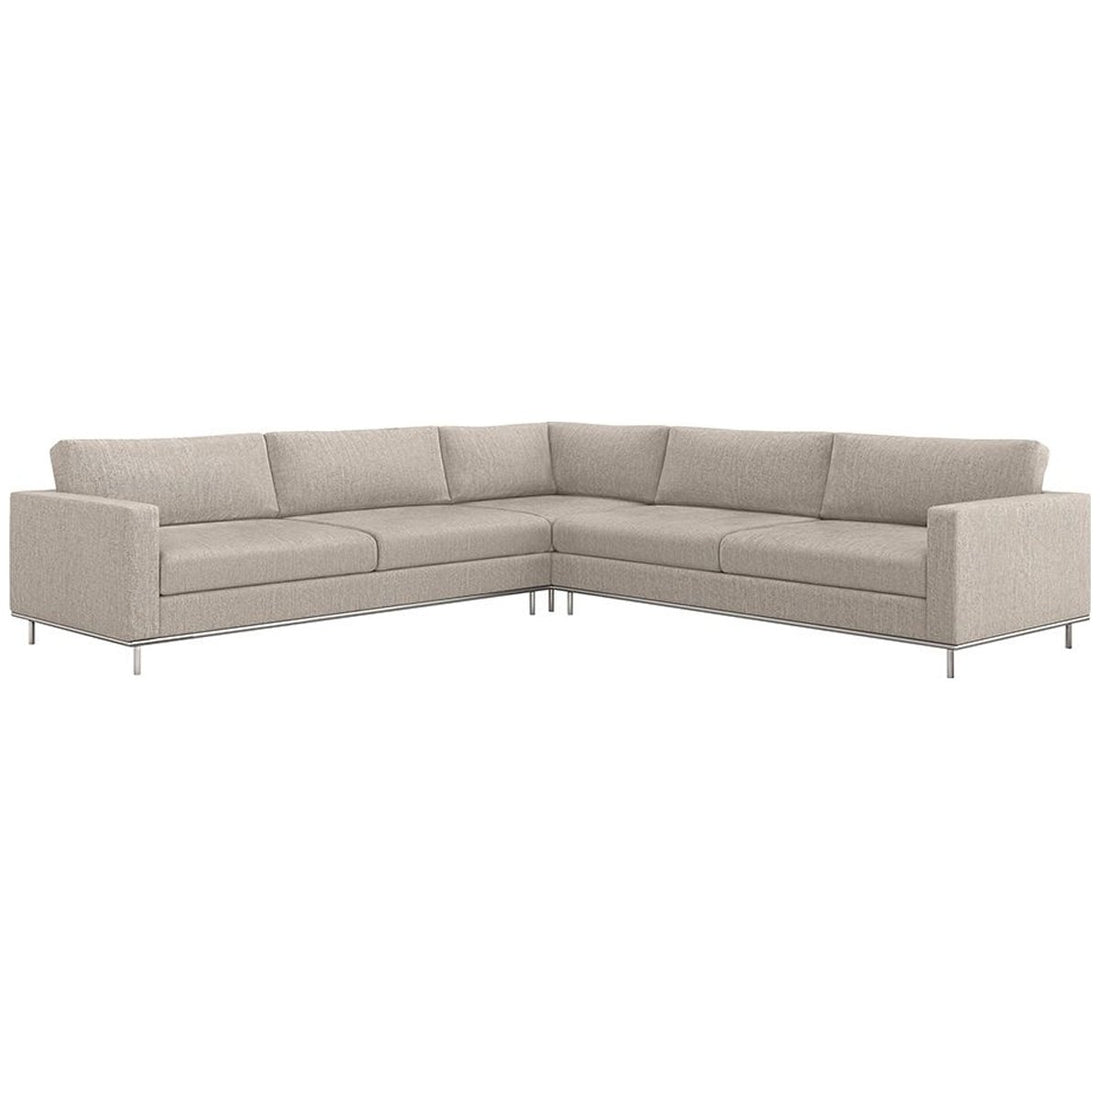 Interlude Home Valencia Luxe Chenille 3-Piece Sectional